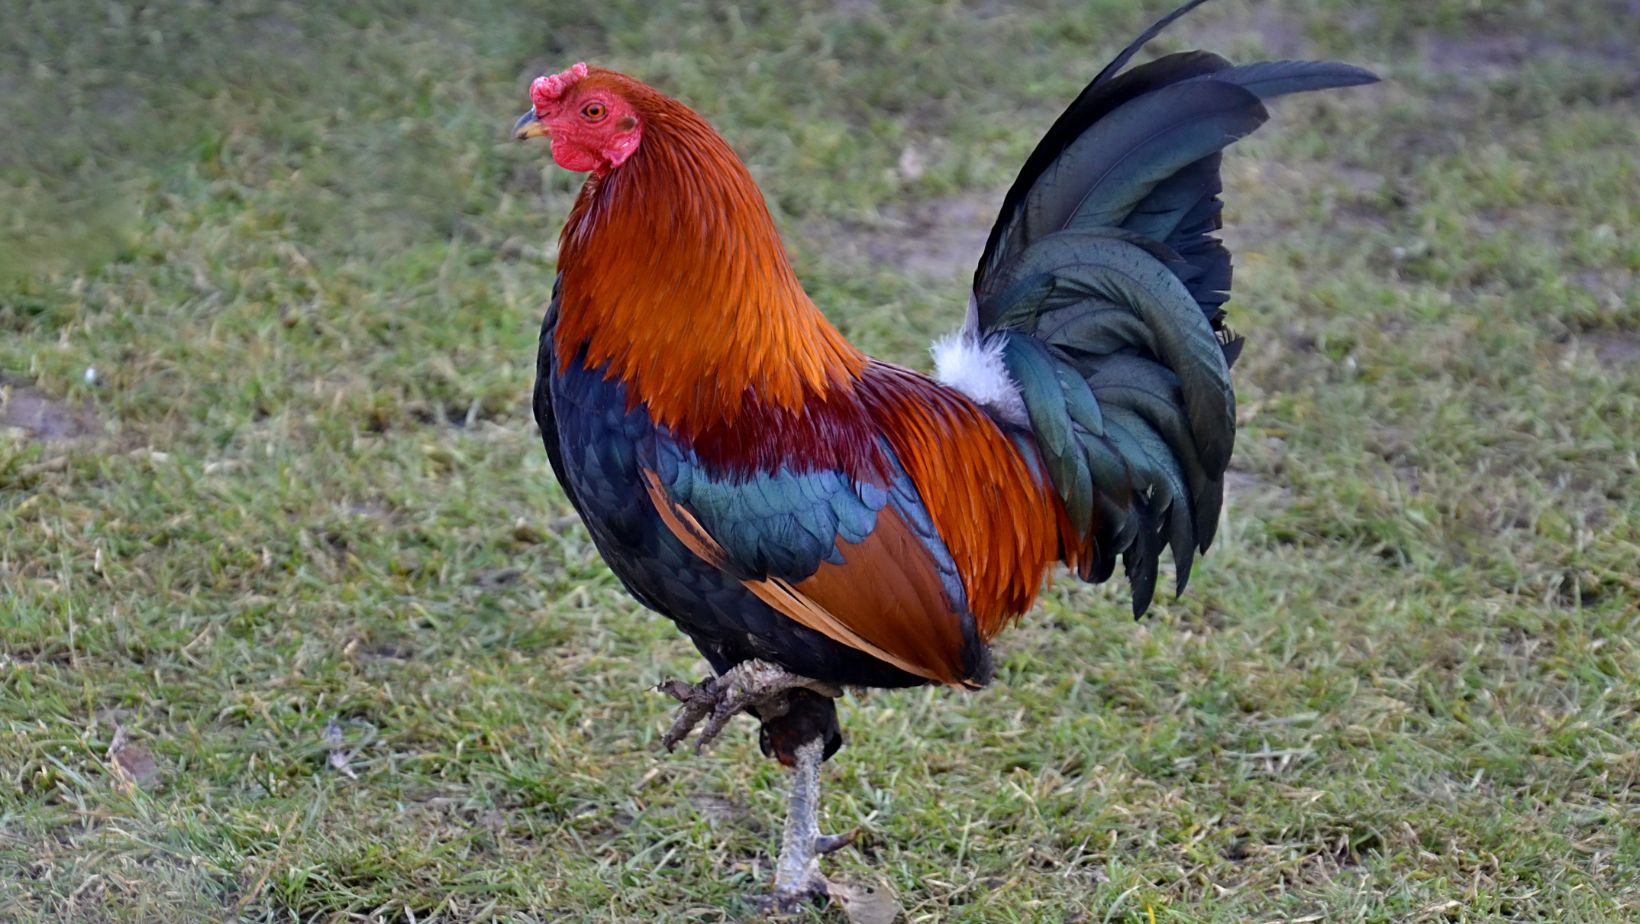 how old does a rooster have to be to breed